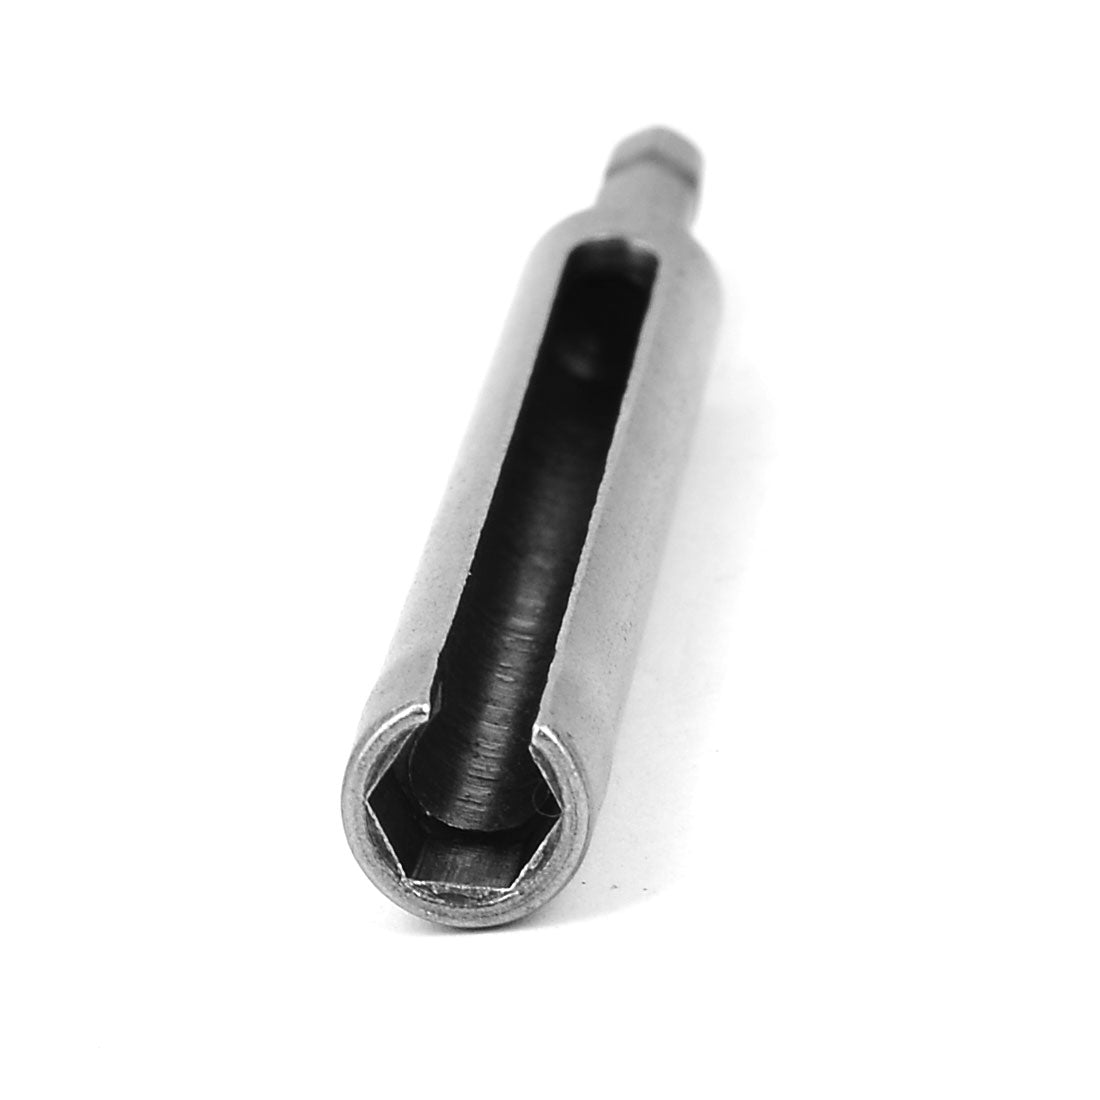 Uxcell Uxcell 17mm Hex Nut Socket Slotted Extension Driver Bit Adapter 135mm Long